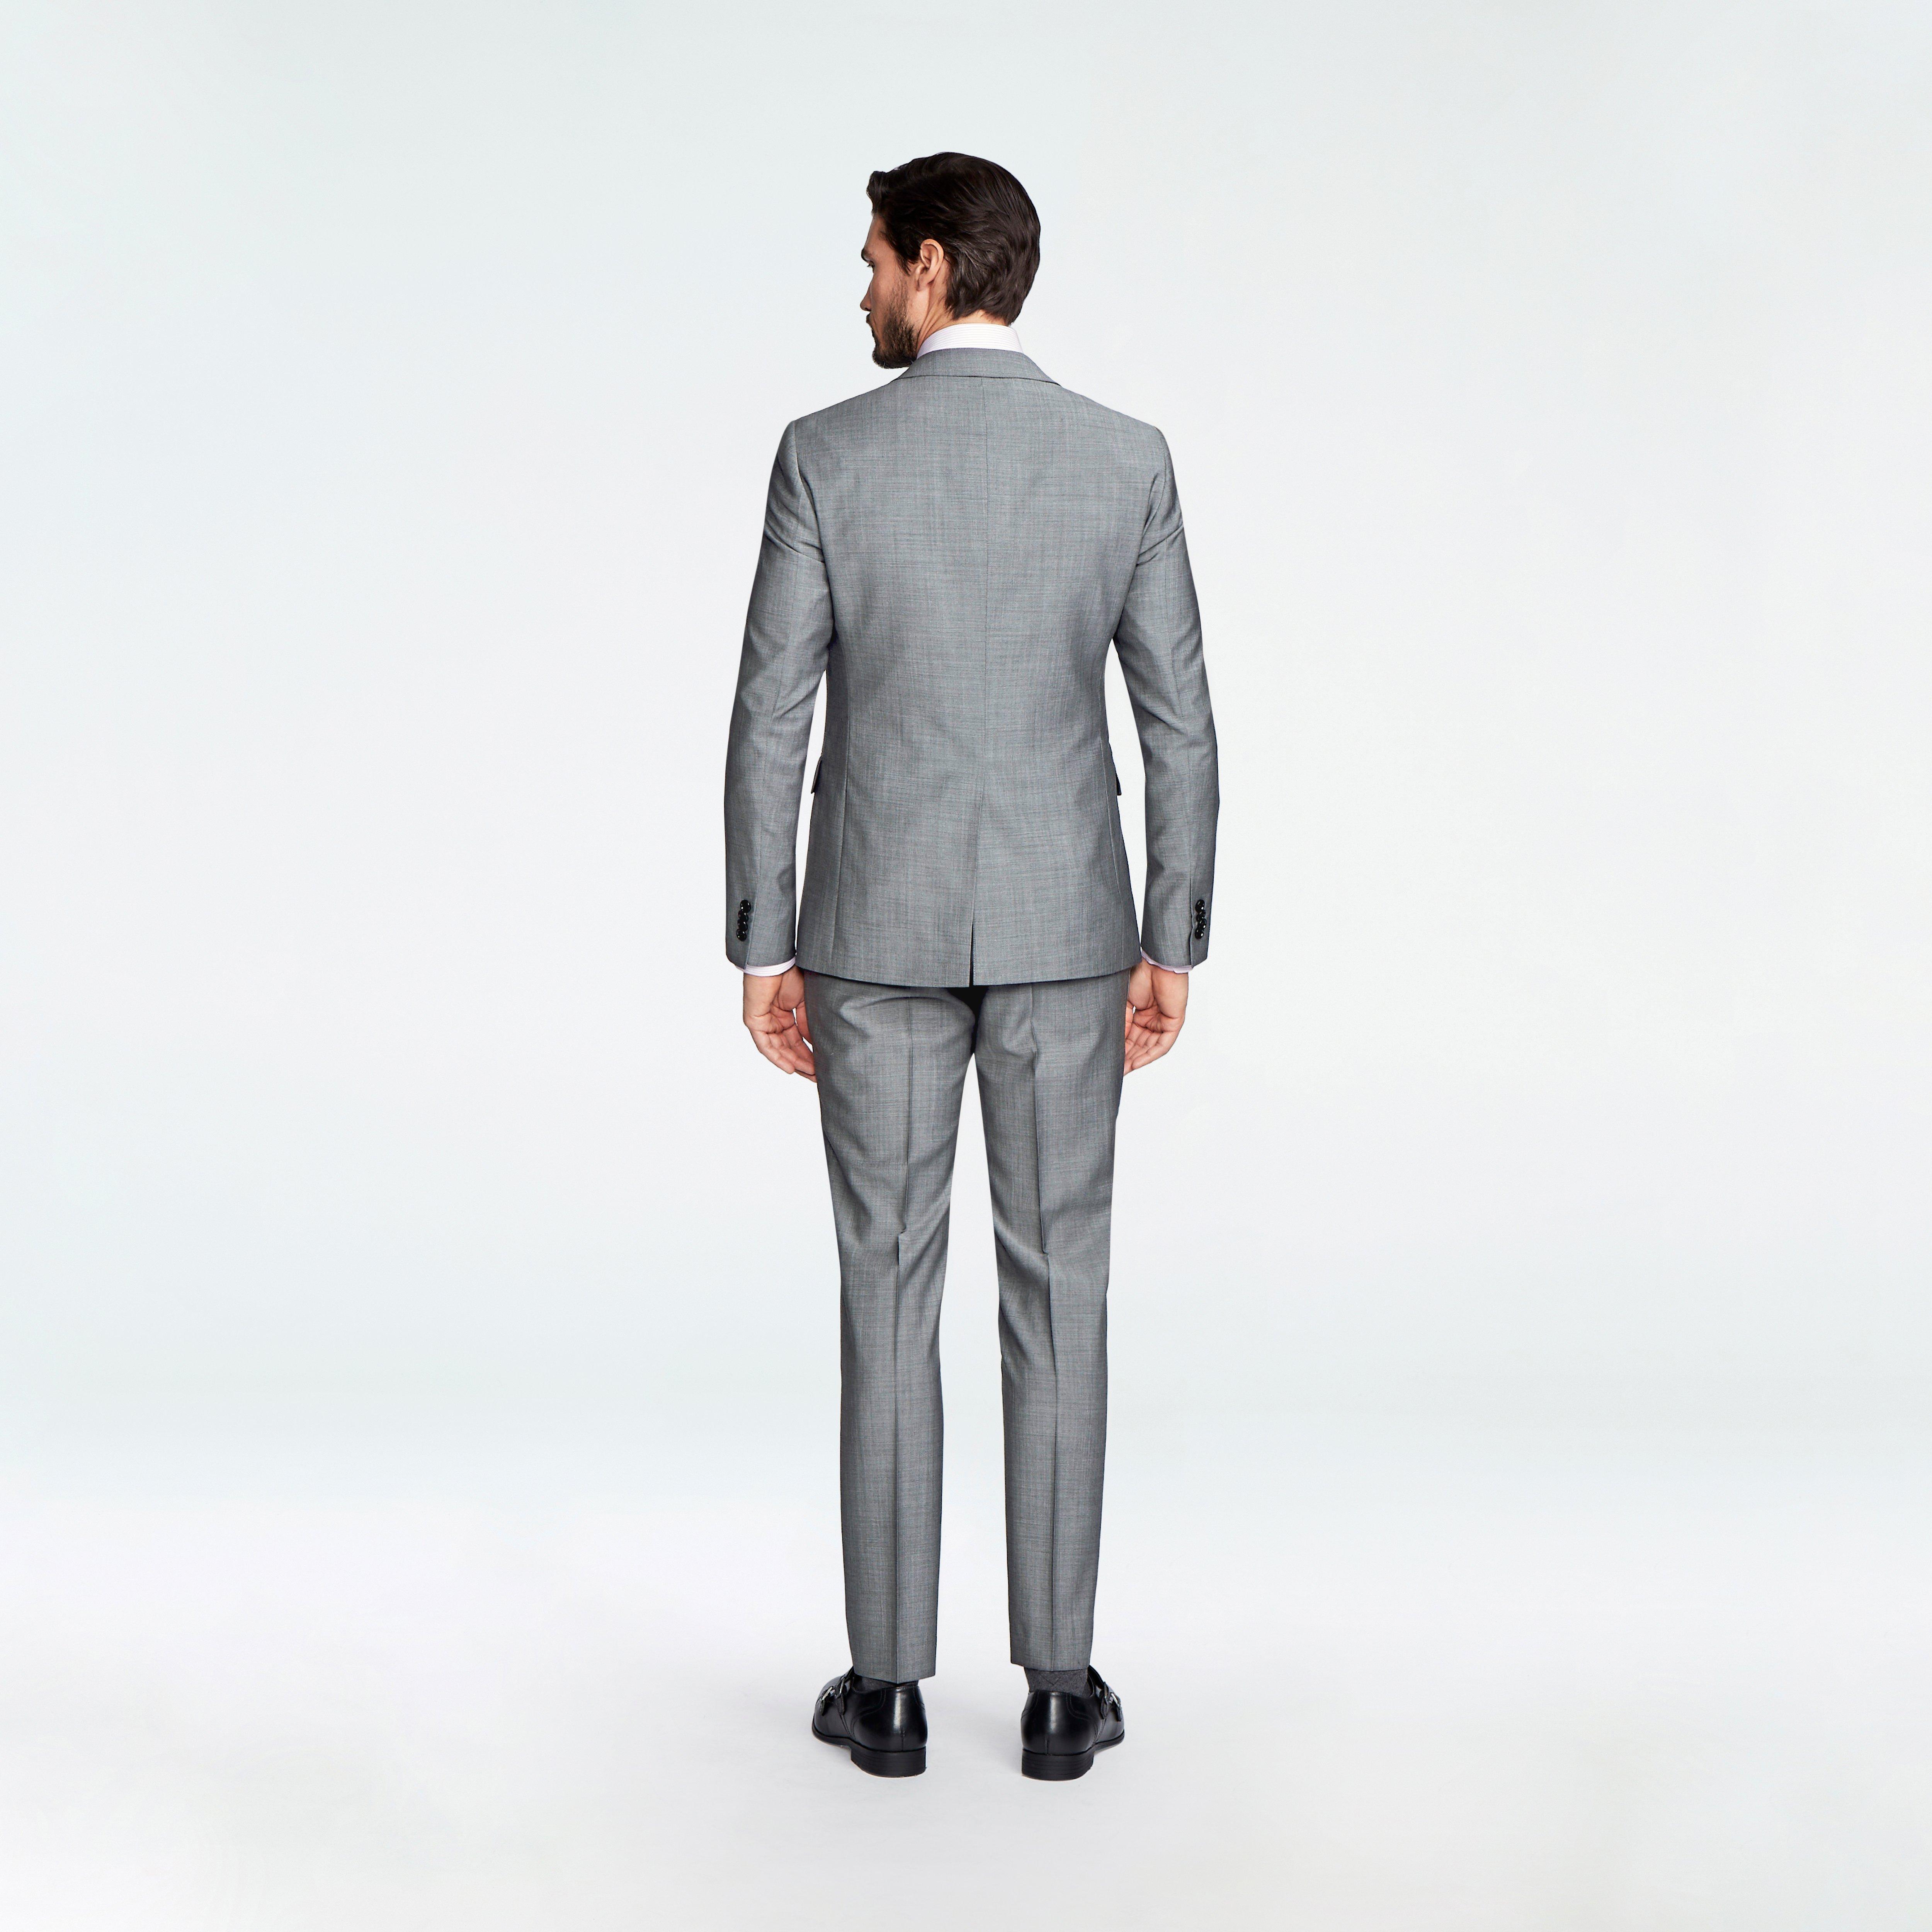 Custom Suits Made For You - Hamilton Sharkskin Light Gray Suit | INDOCHINO